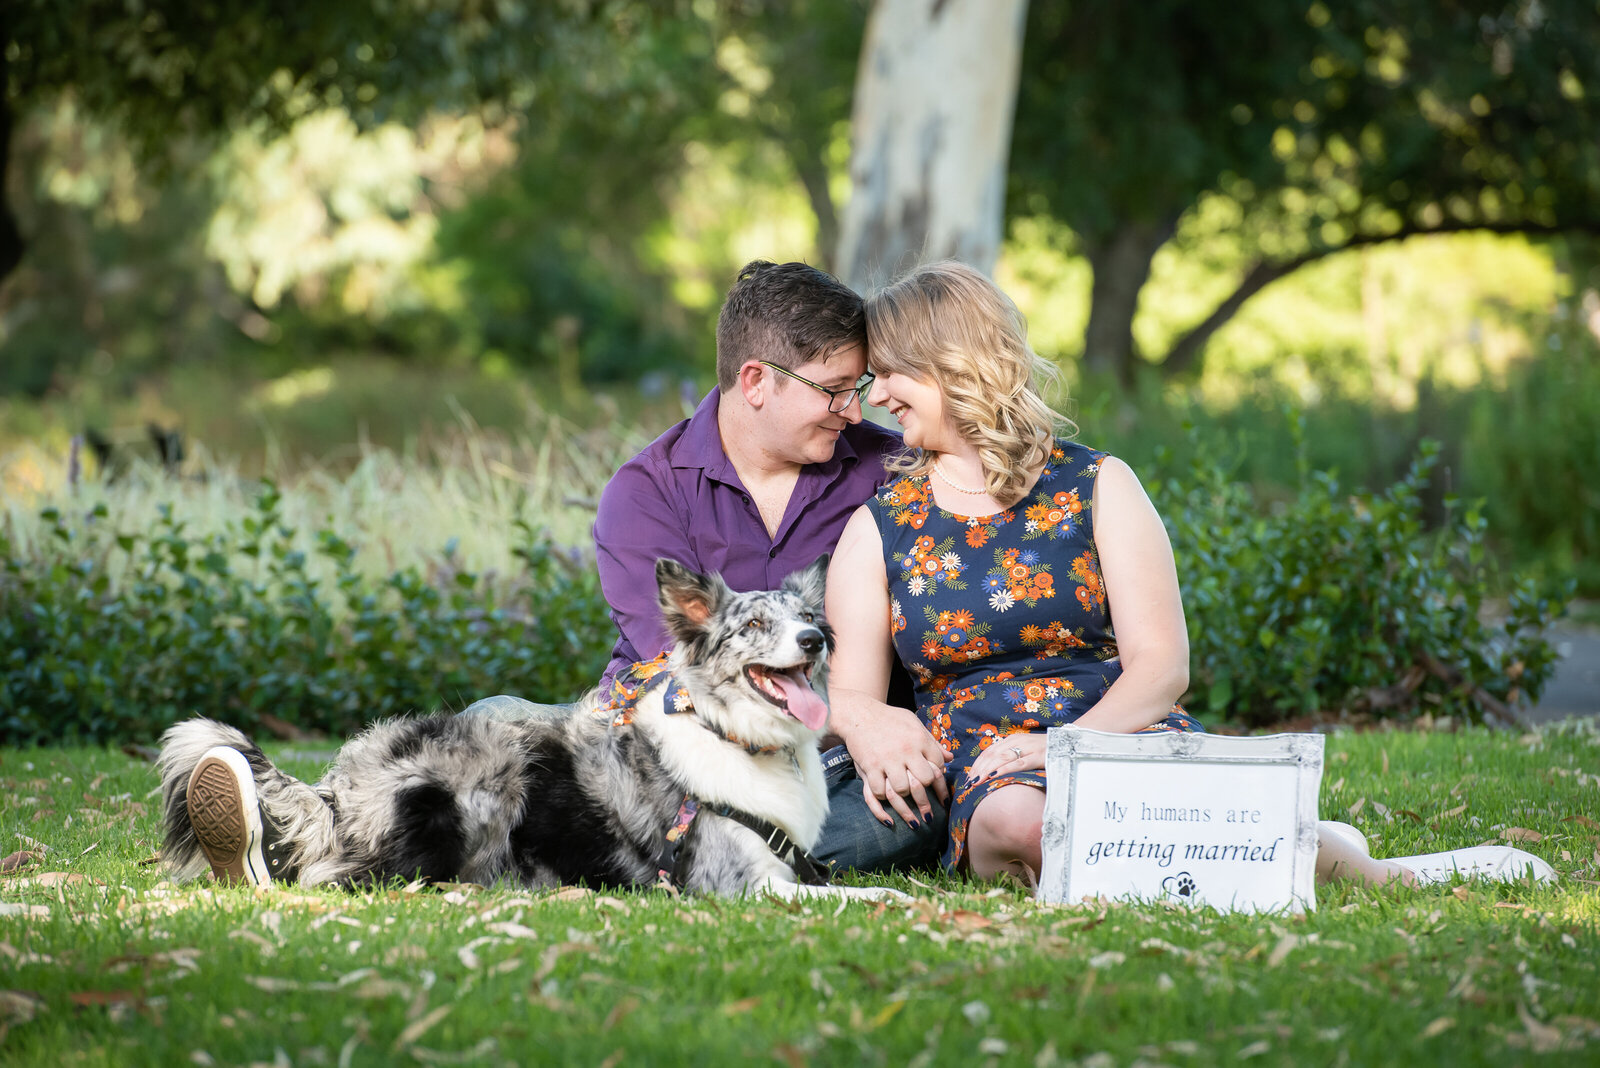 Adelaide_DreamTeamImaging_Engagement_Photography_08